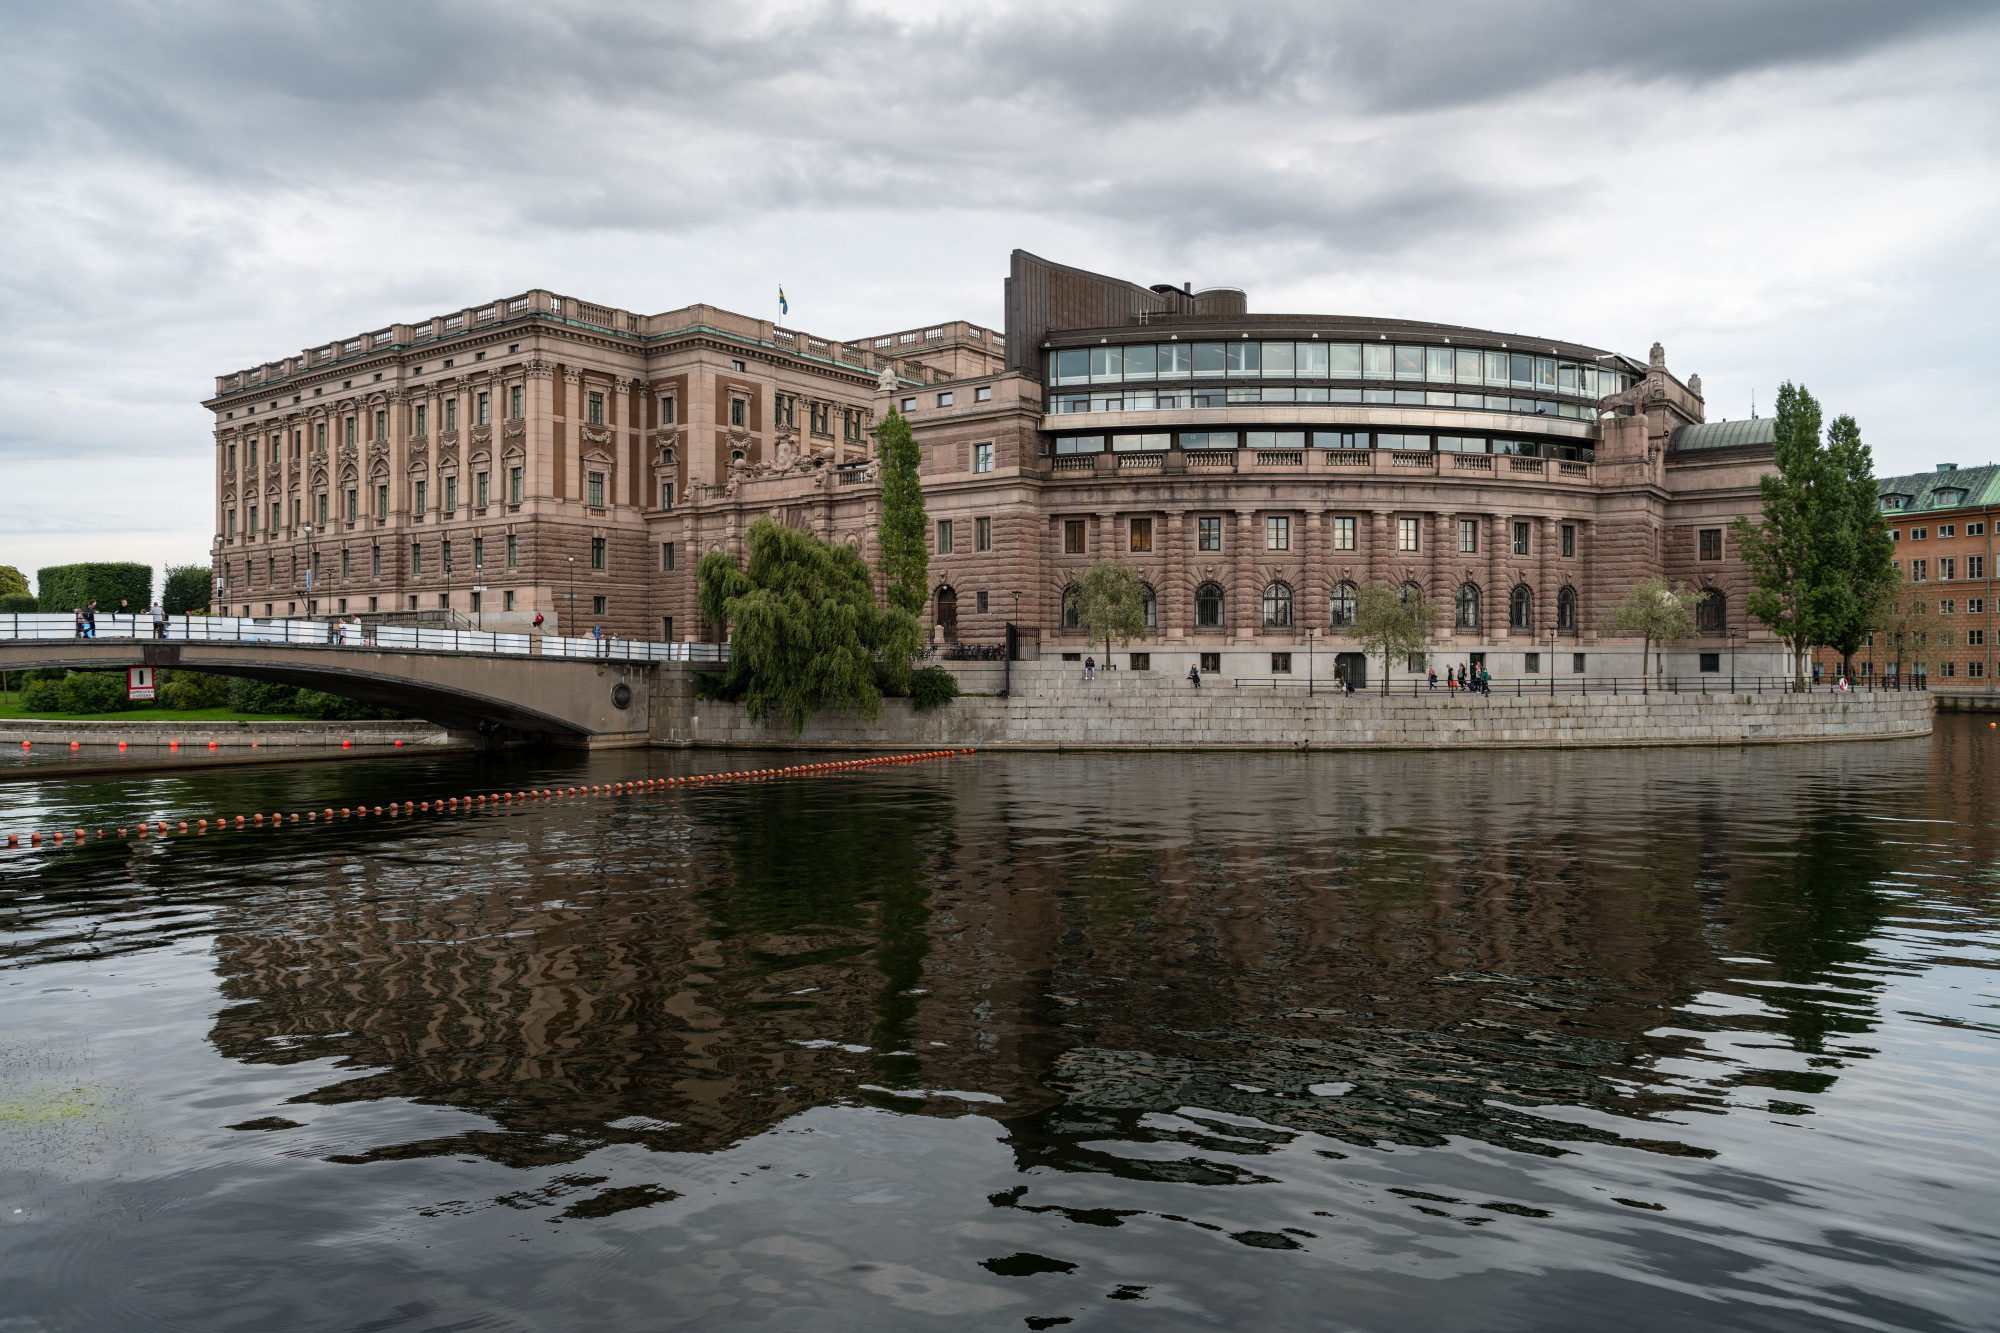 The Riksdag building of the Swedish Parliament stands in Stockholm.